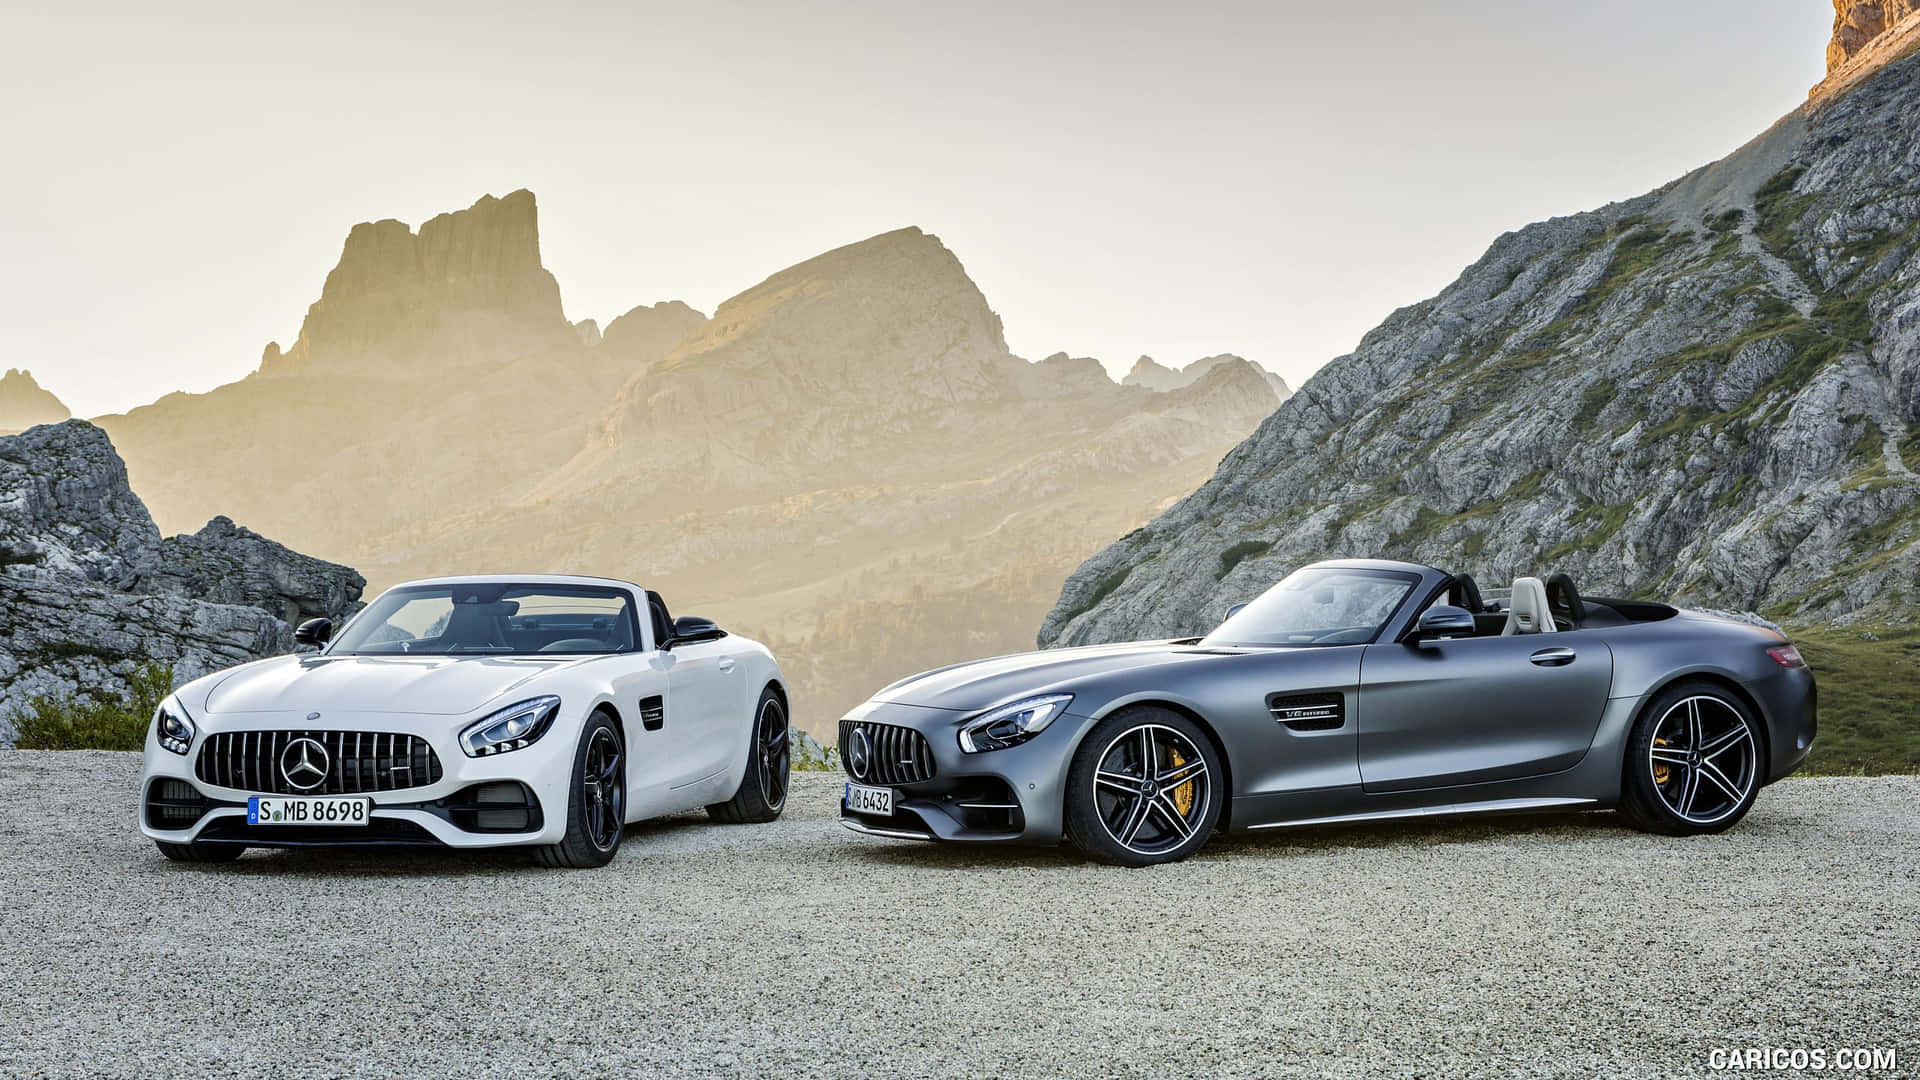 Experience Luxury and Power With The Mercedes Amg